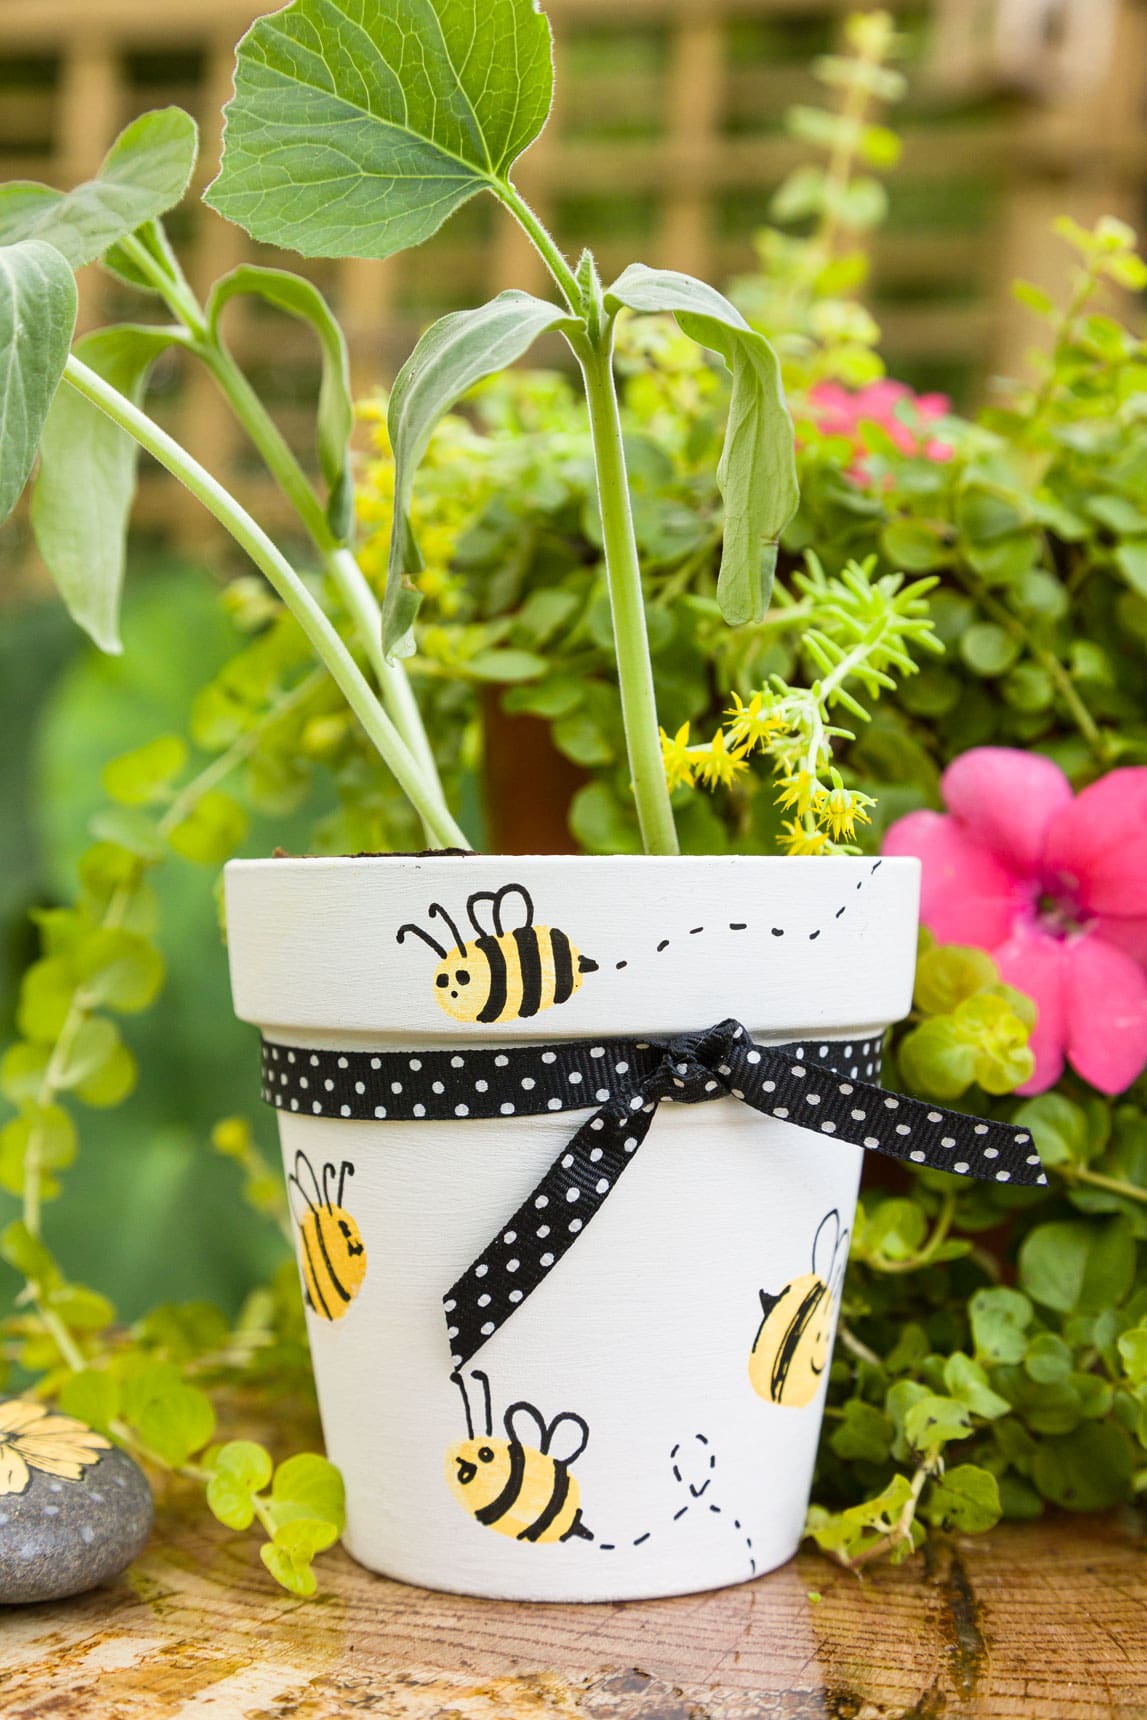 Flower pot painting with bees using thumbprints